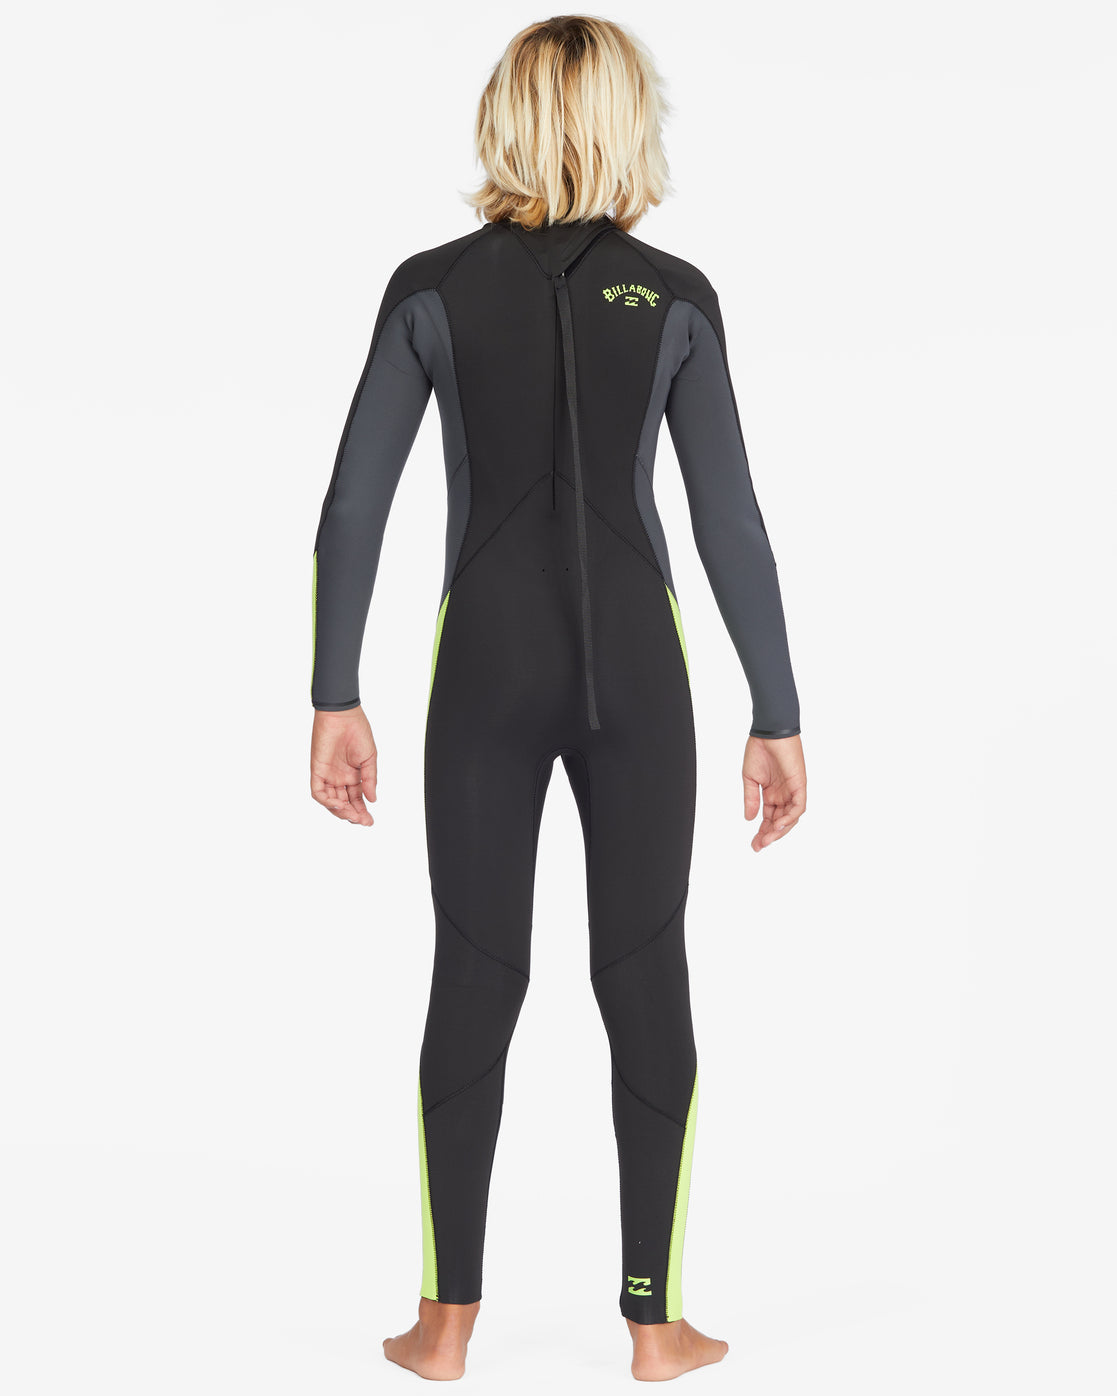 Billabong Absolute BZ GBS Boys 3/2mm Wetsuit stealth colourway back view